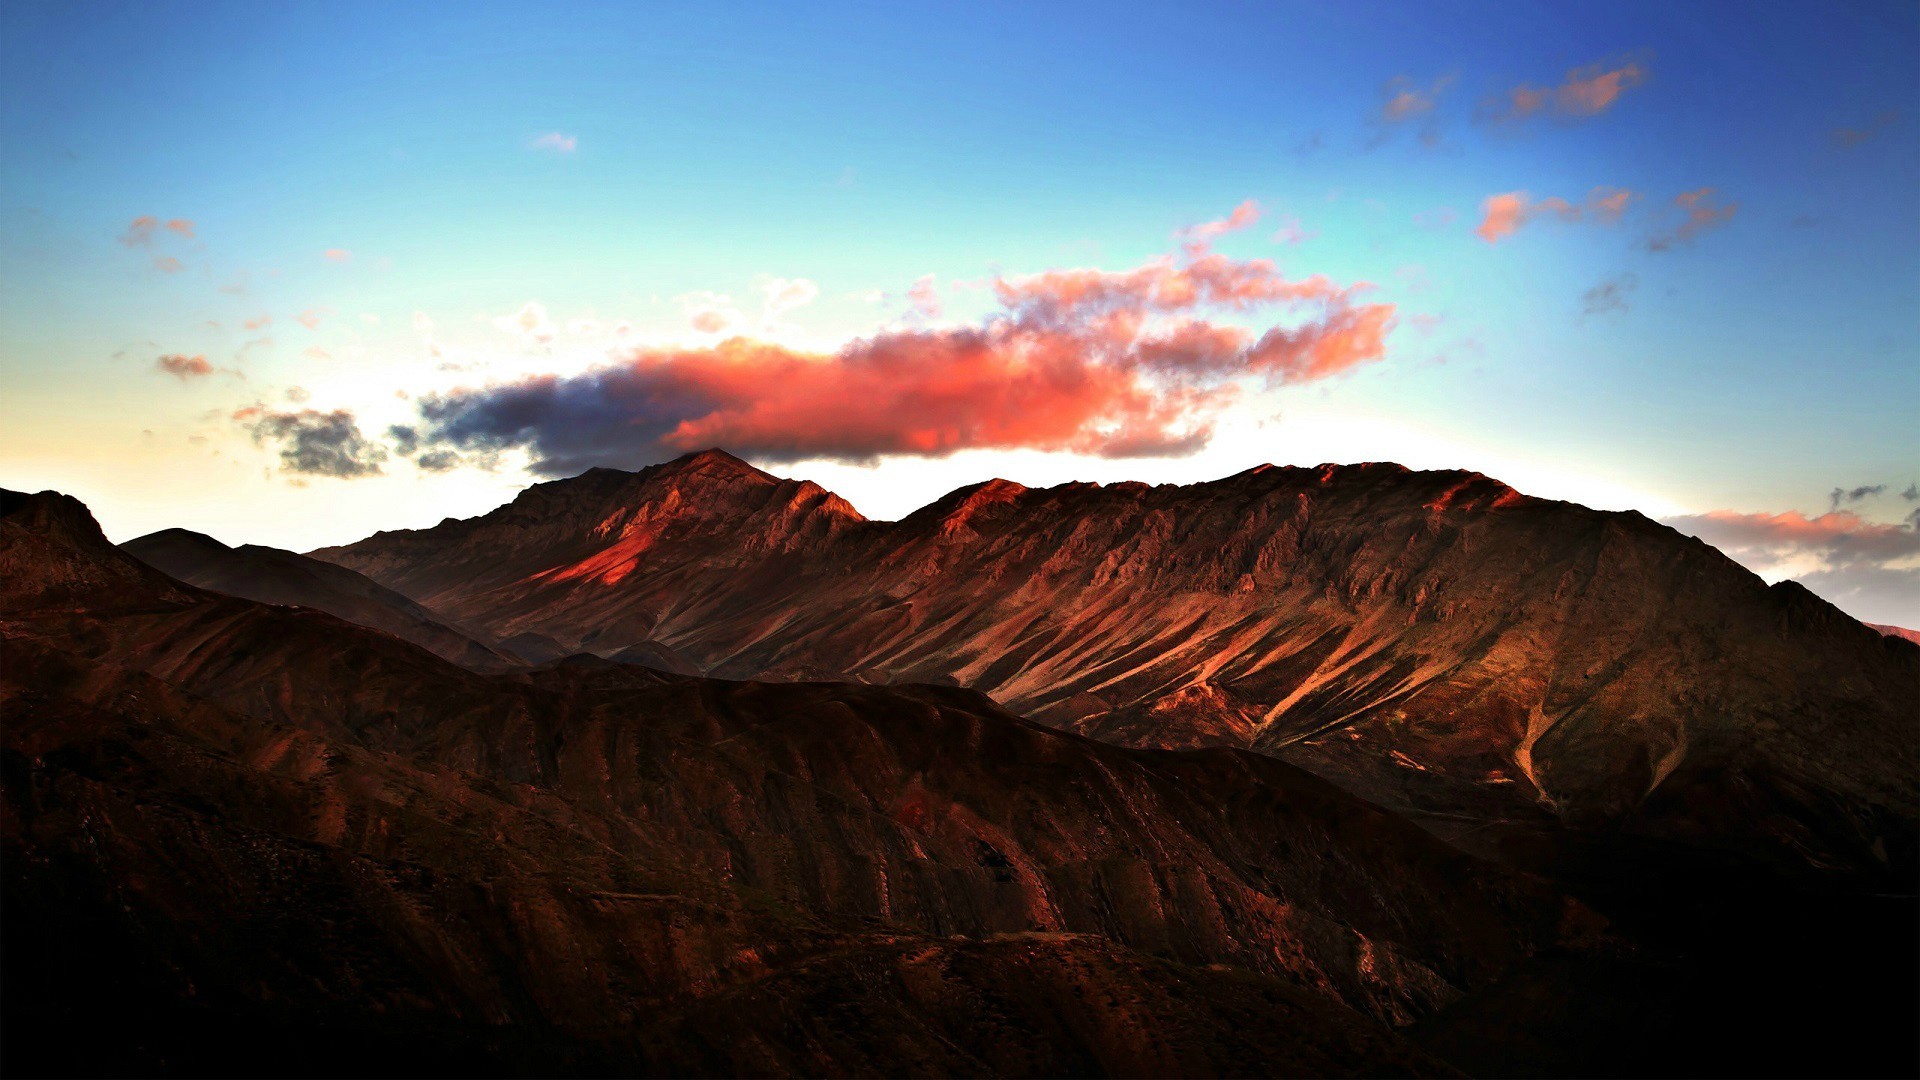 General 1920x1080 mountains nature landscape morning clouds red blue orange low light